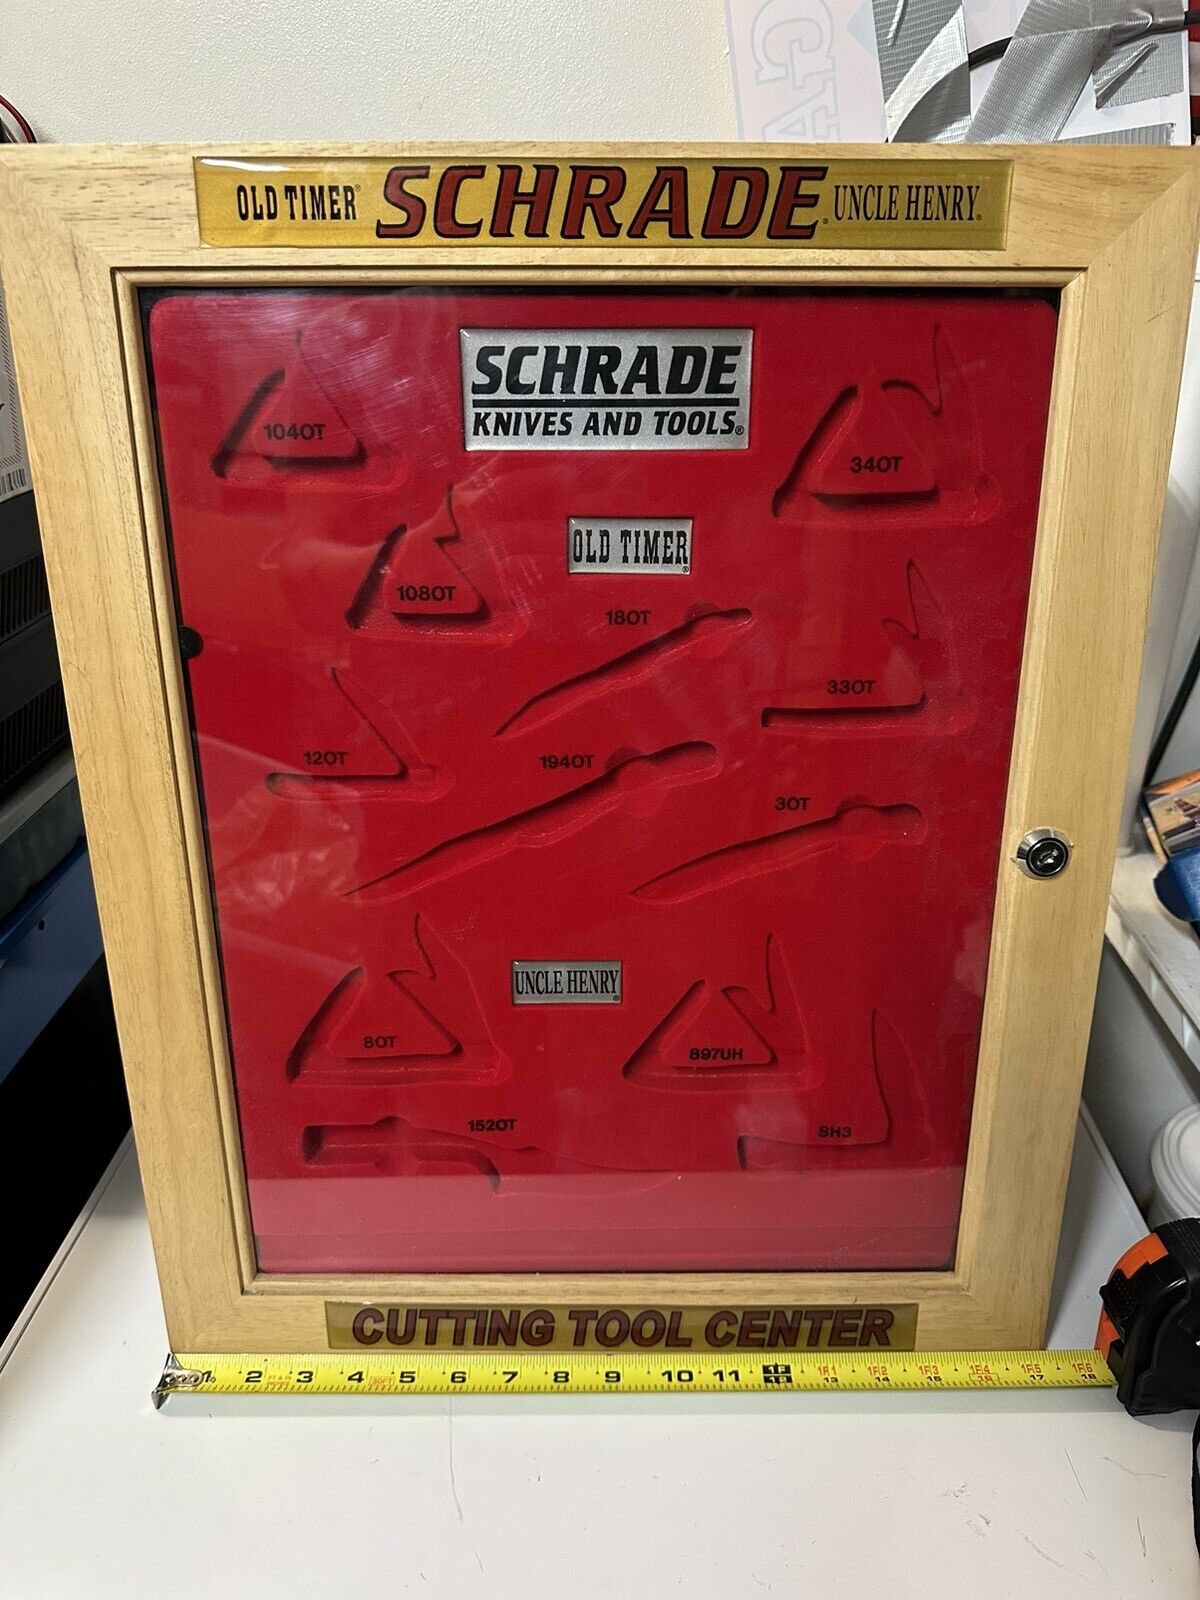 VTG SCHRADE/TAYLOR USA OLD TIMER UNCLE HENRY DBL SIDED COUNTER STORE DISPLAY